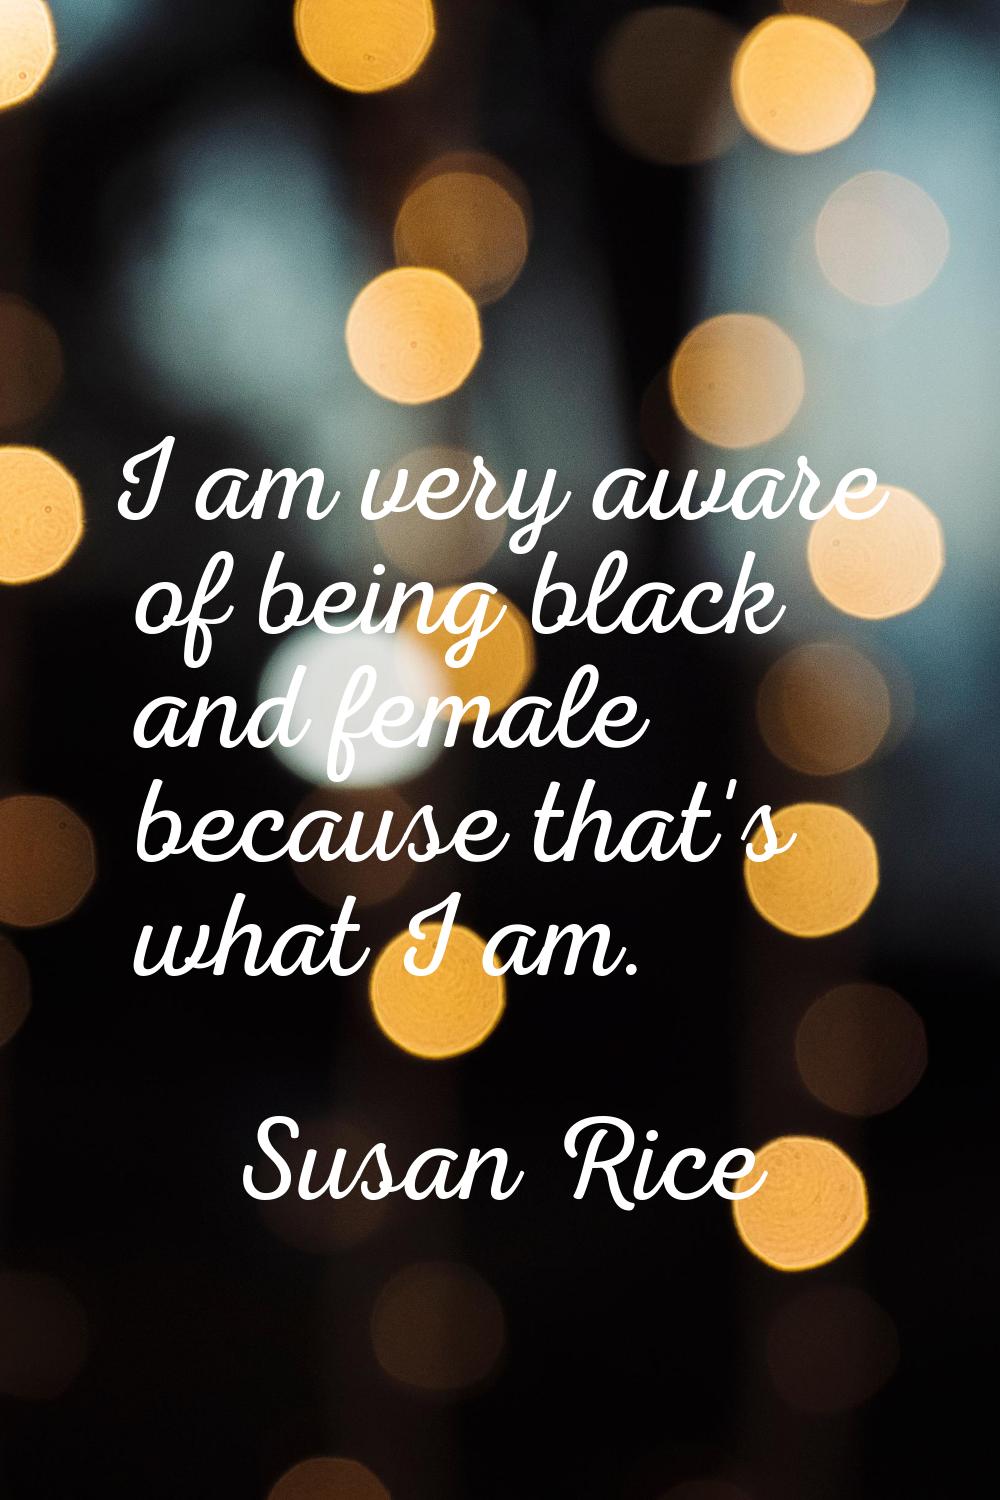 I am very aware of being black and female because that's what I am.